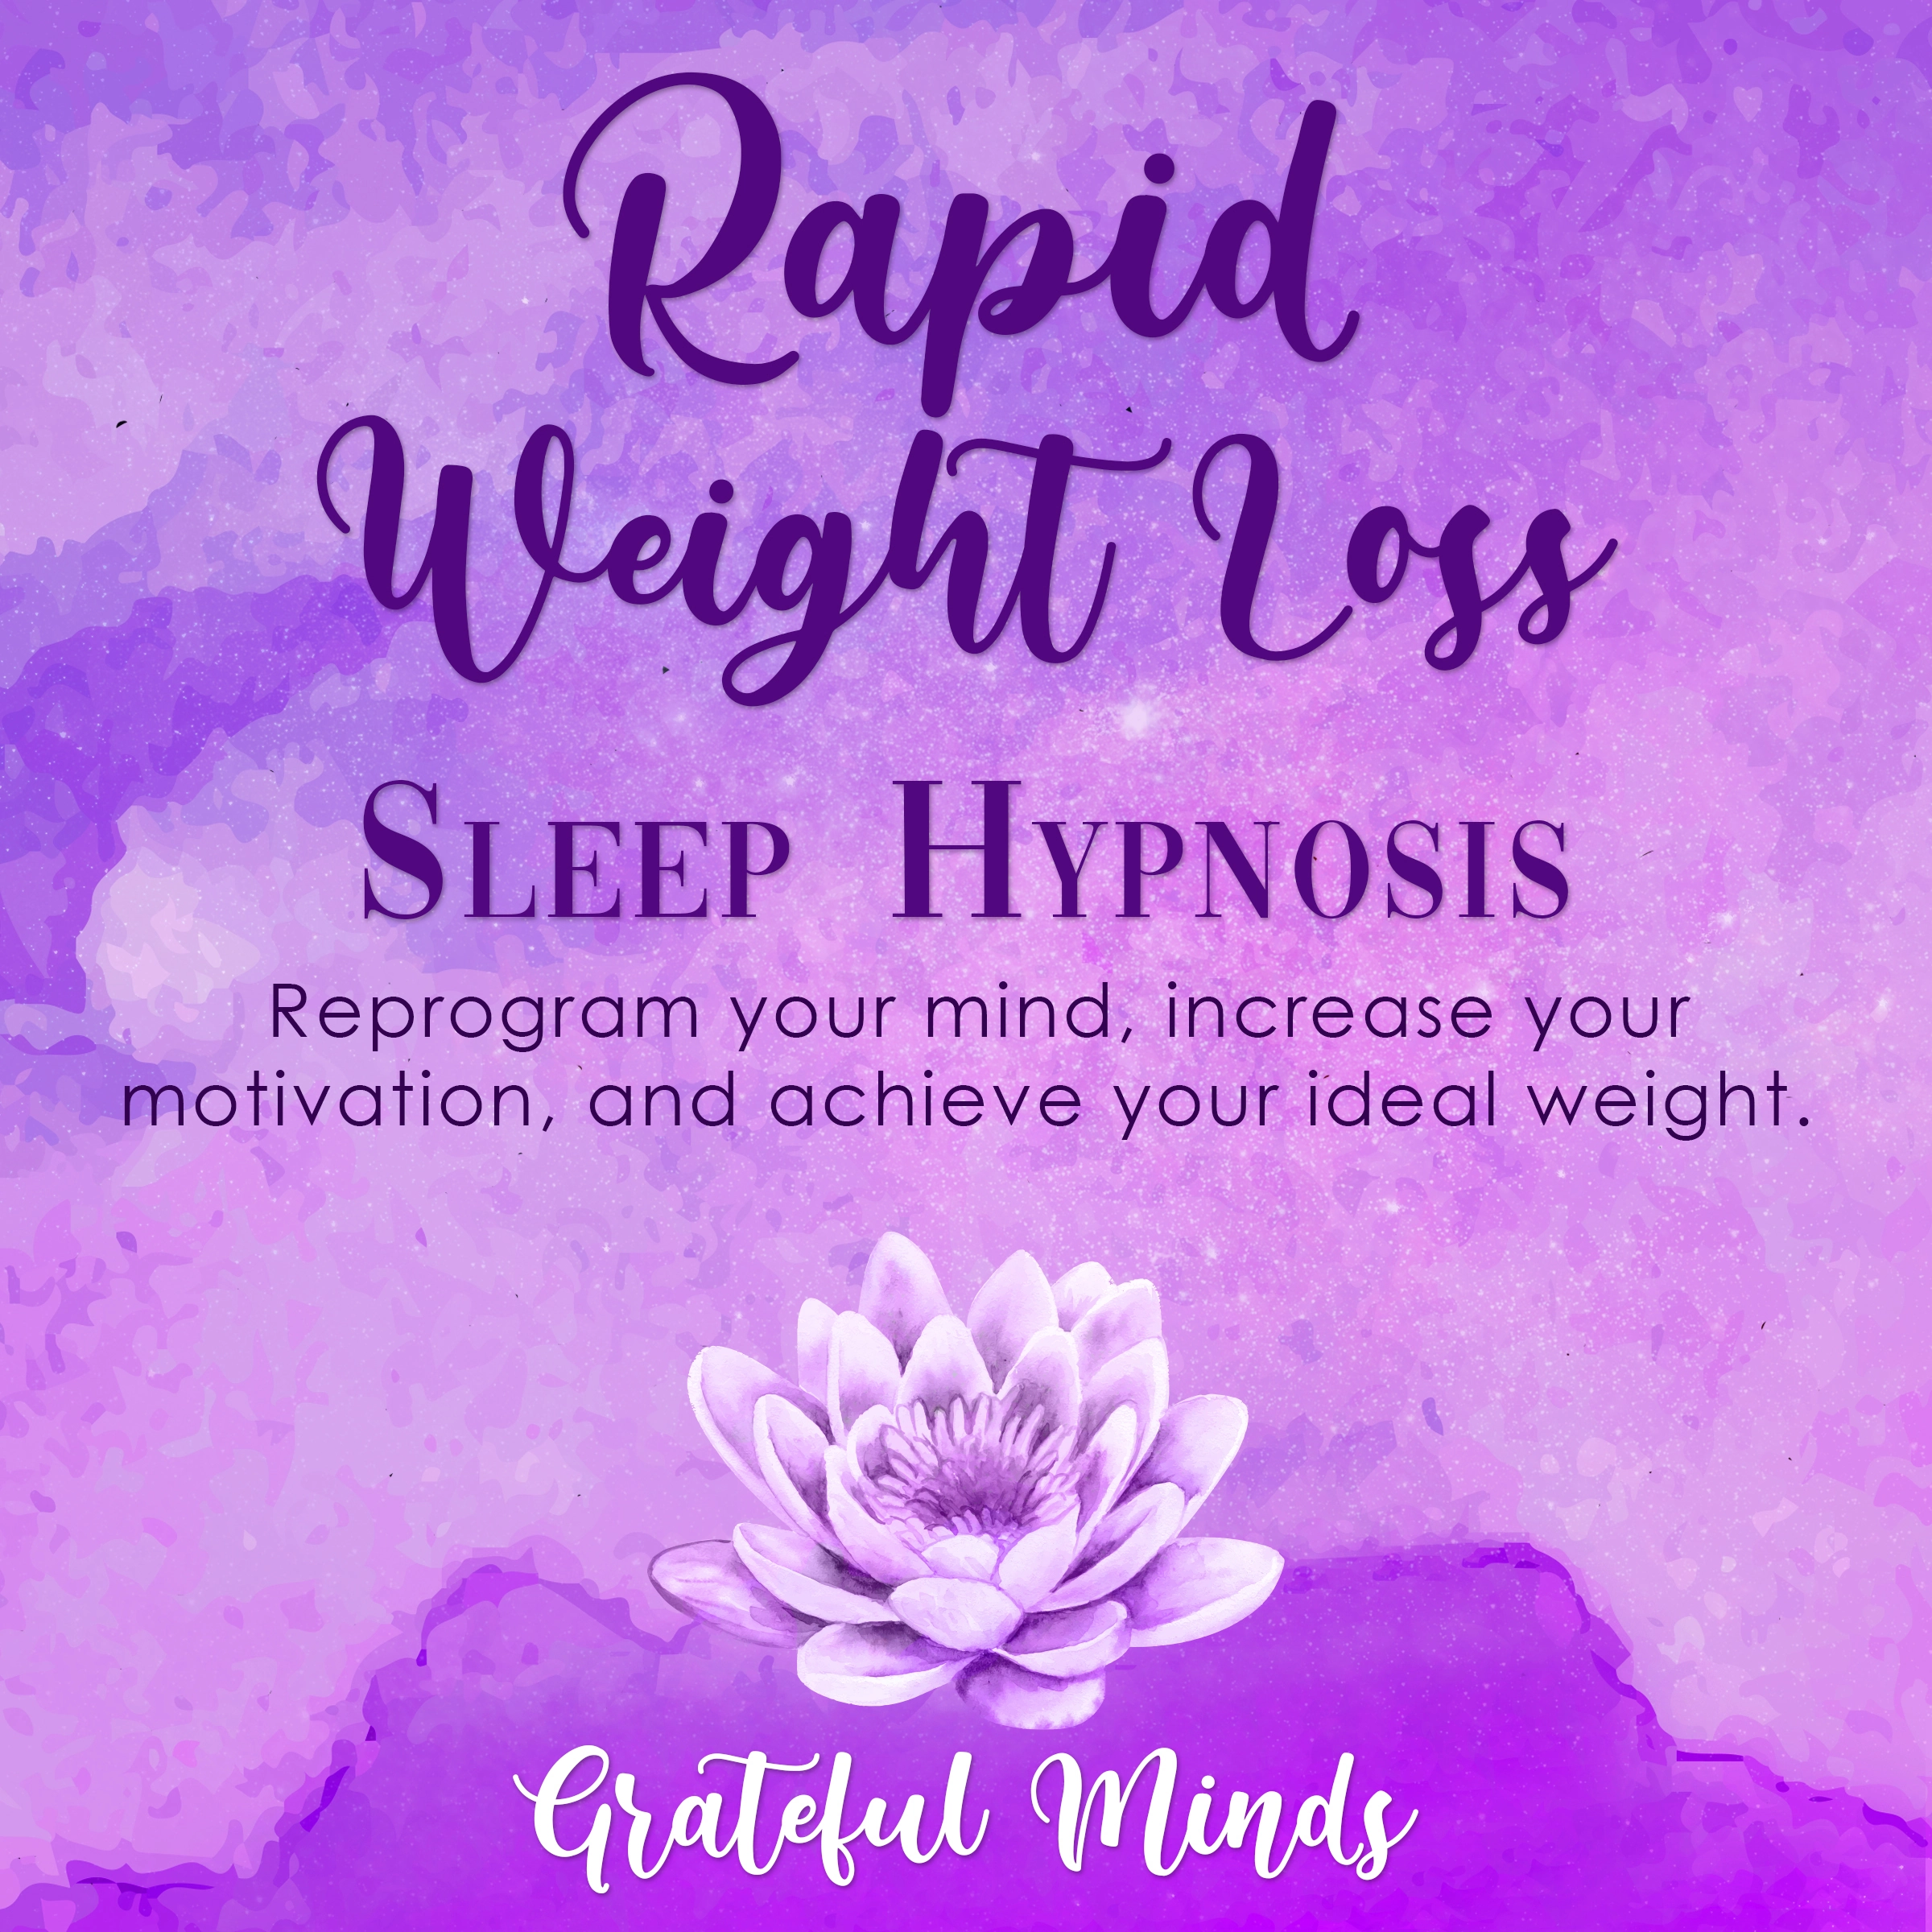 Rapid Weight Loss Sleep Hypnosis Audiobook by Grateful Minds